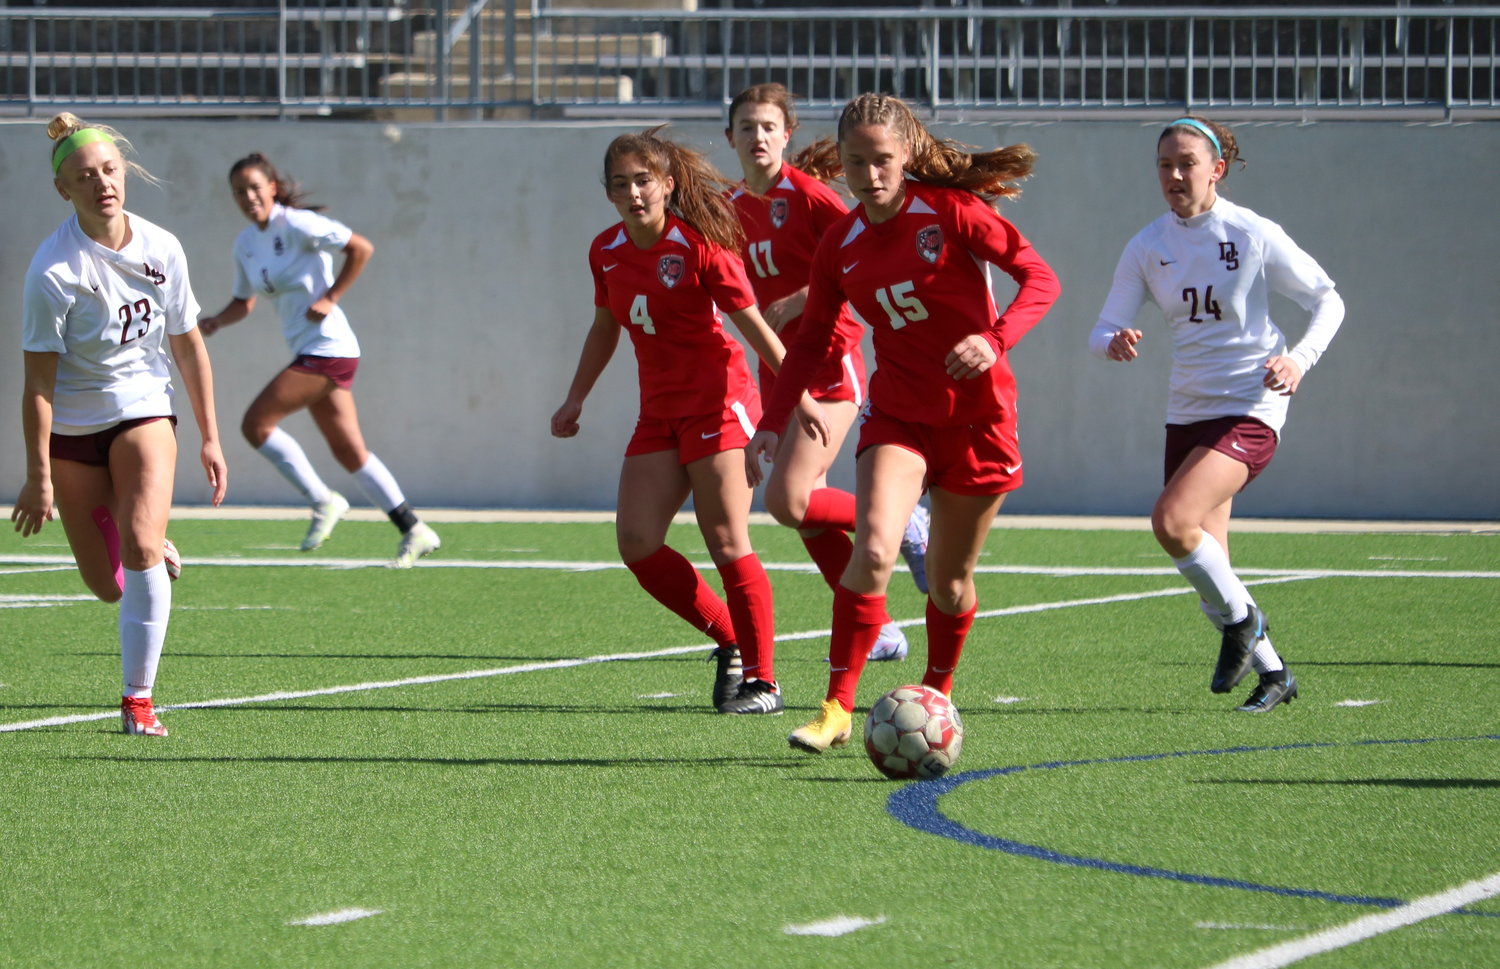 Anna Kneisley dribbles the ball during a game between Katy and Dripping Springs at Legacy Stadium on Saturday.